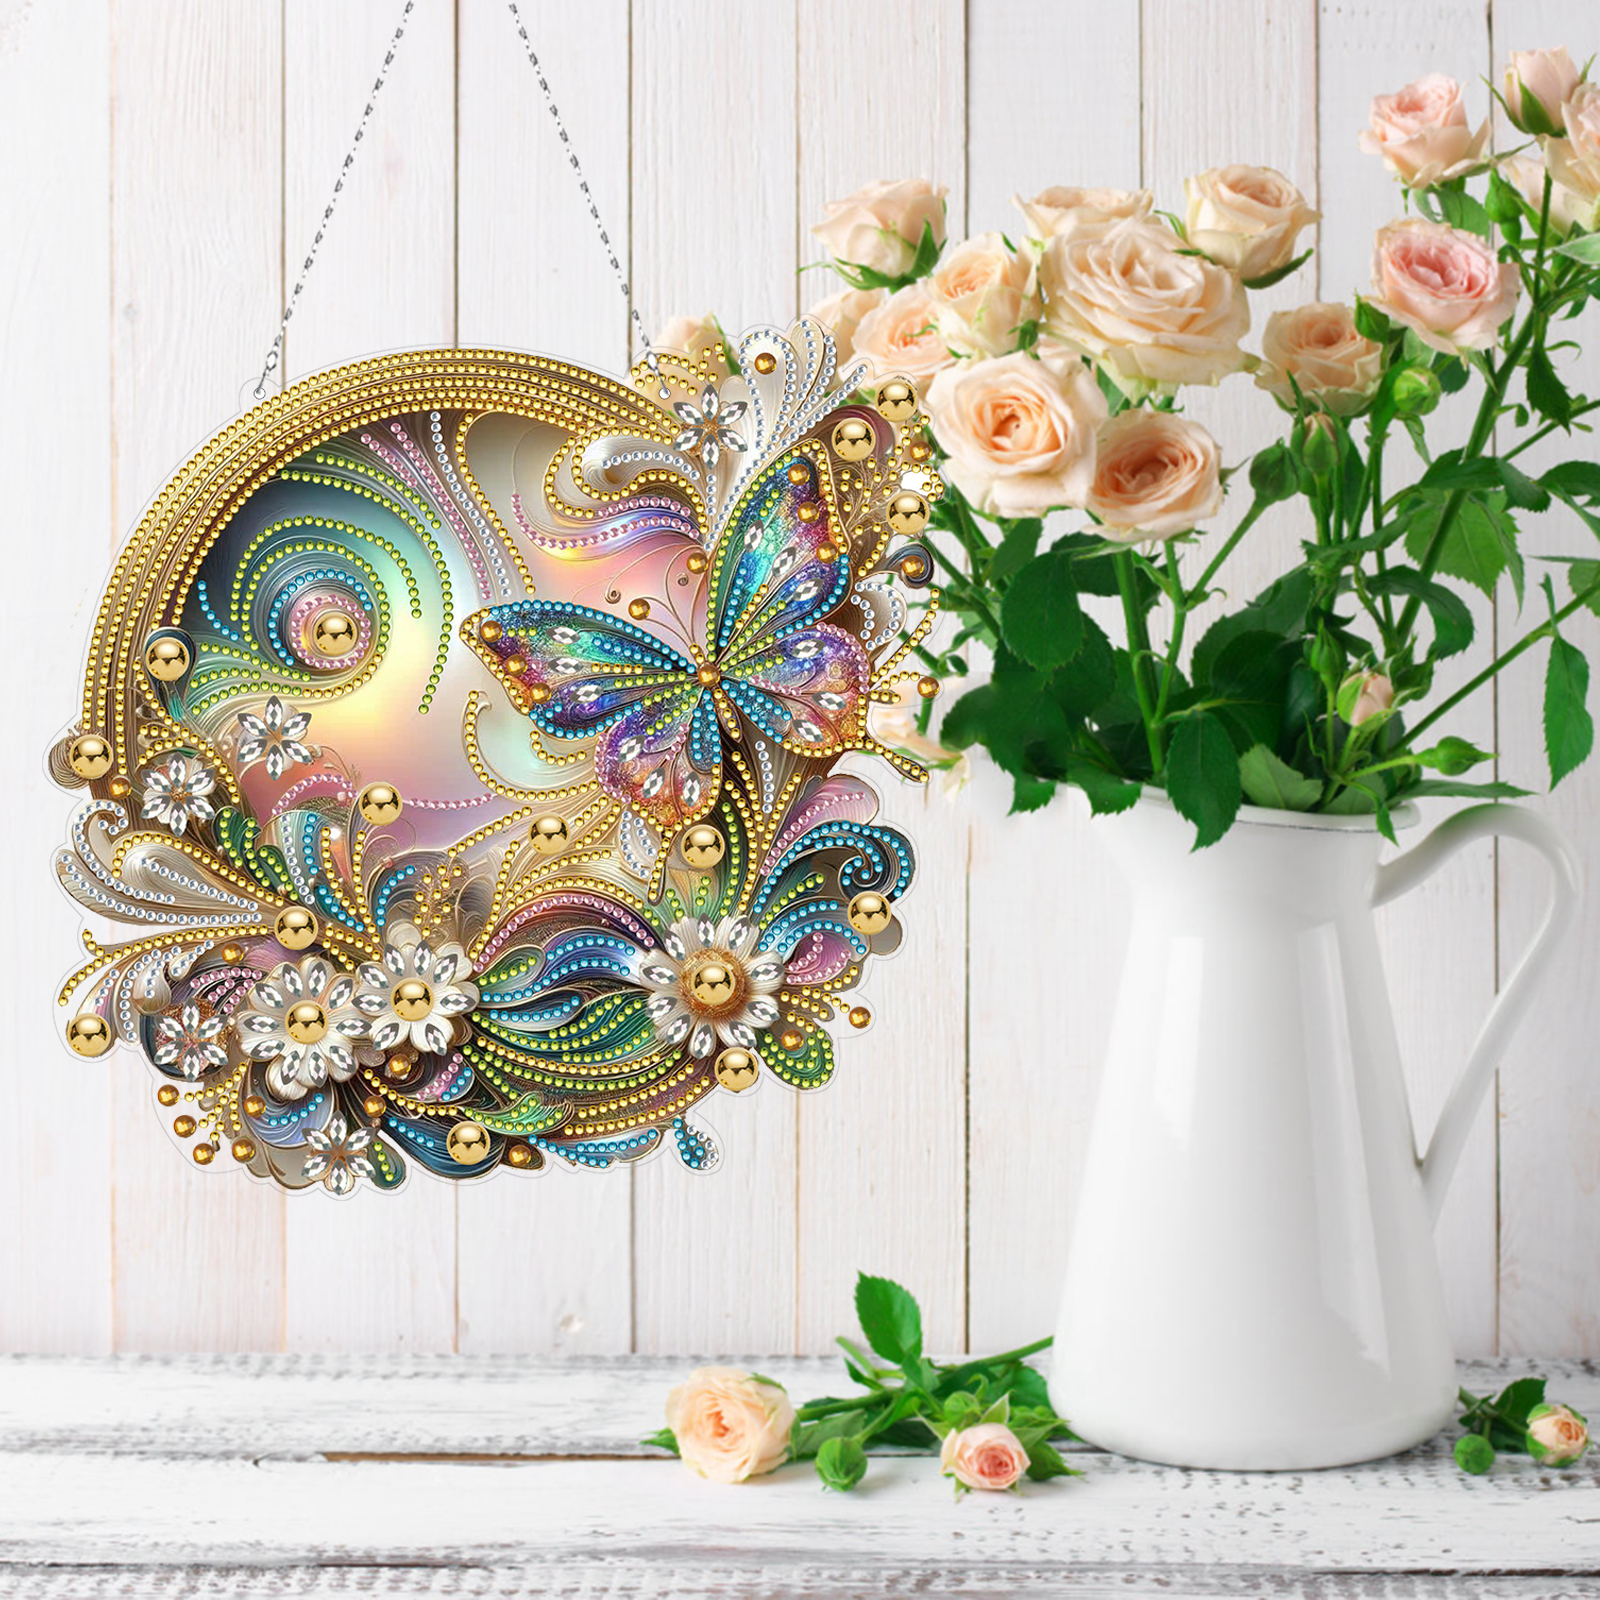 (Upgrade Size)DIY Double Sided Effect Diamond Painting Hanging Pendant Kit (Flower Butterfly)